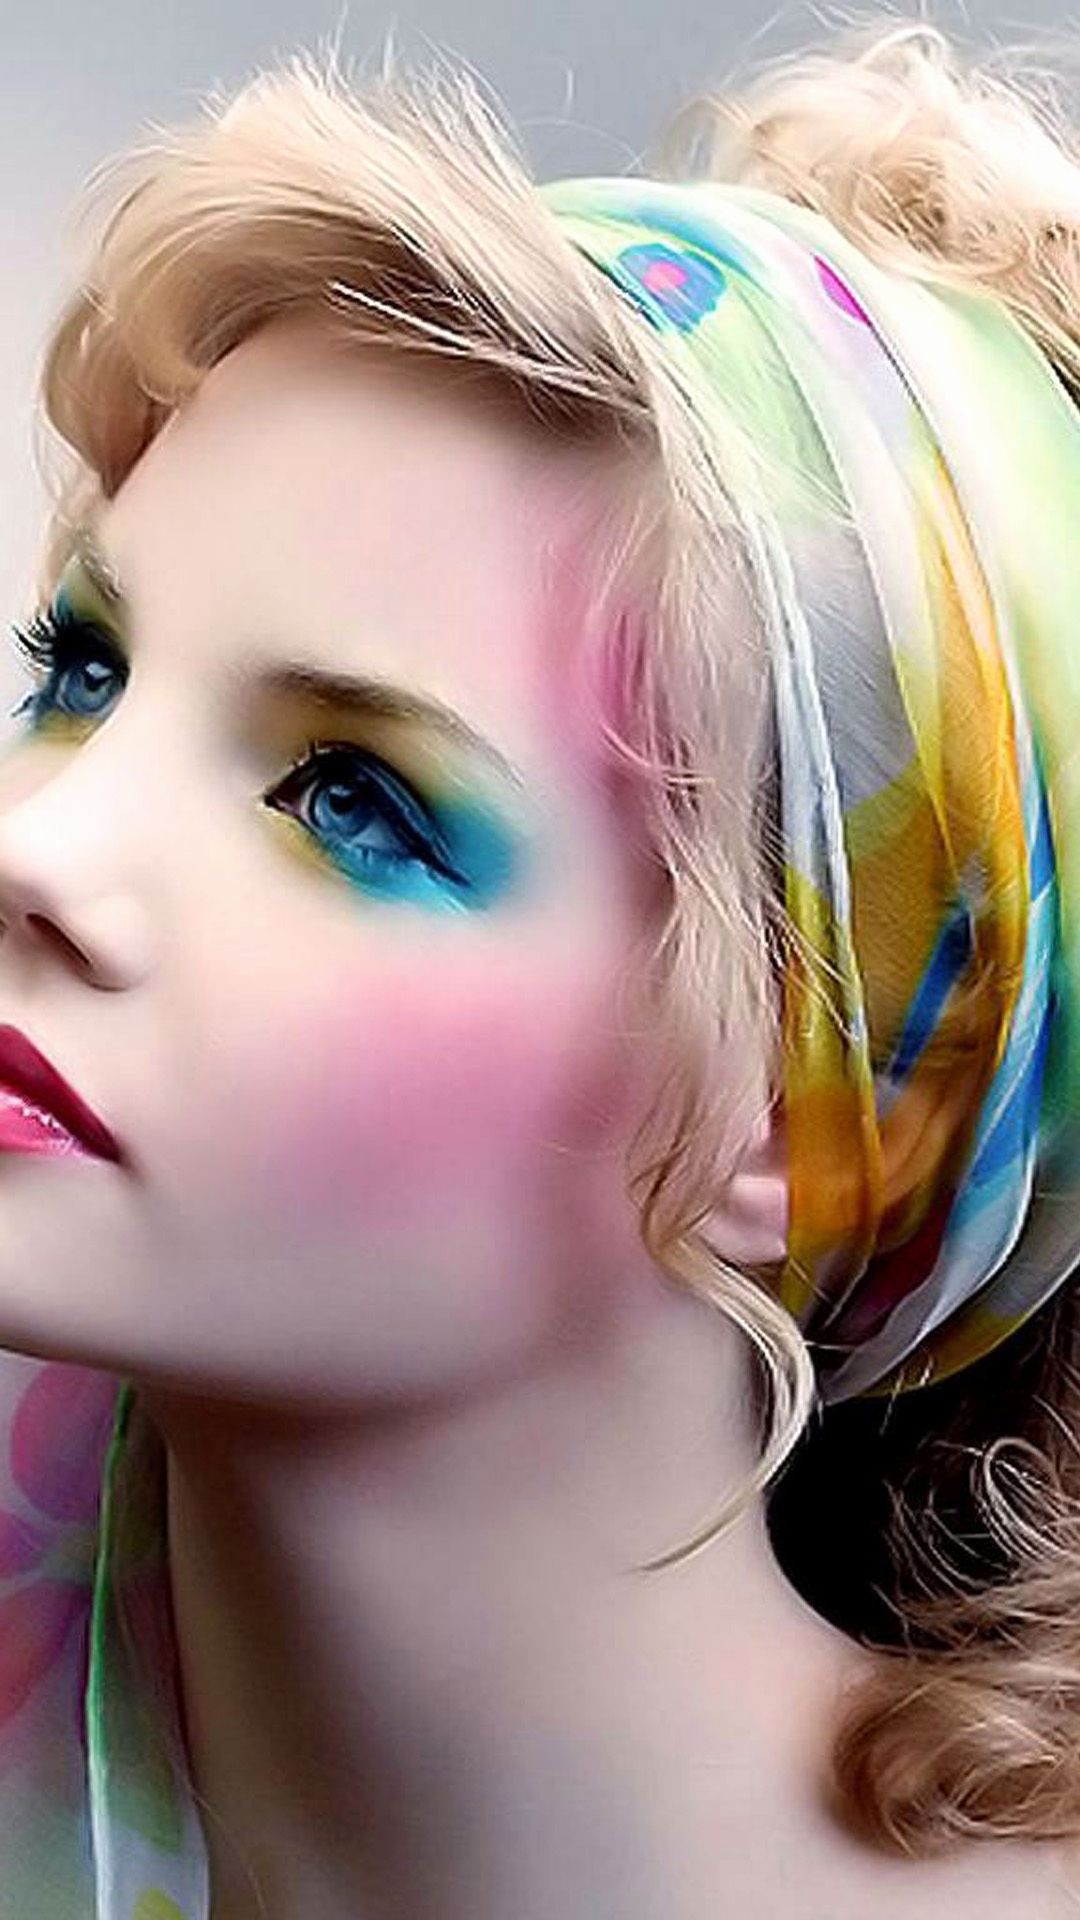 Wallpaper for Girls Lovely Beautiful Girl with Colorful Hair Desktop Wallpaper HD for Mobile Phones and Laptops Inspiration of The Hudson